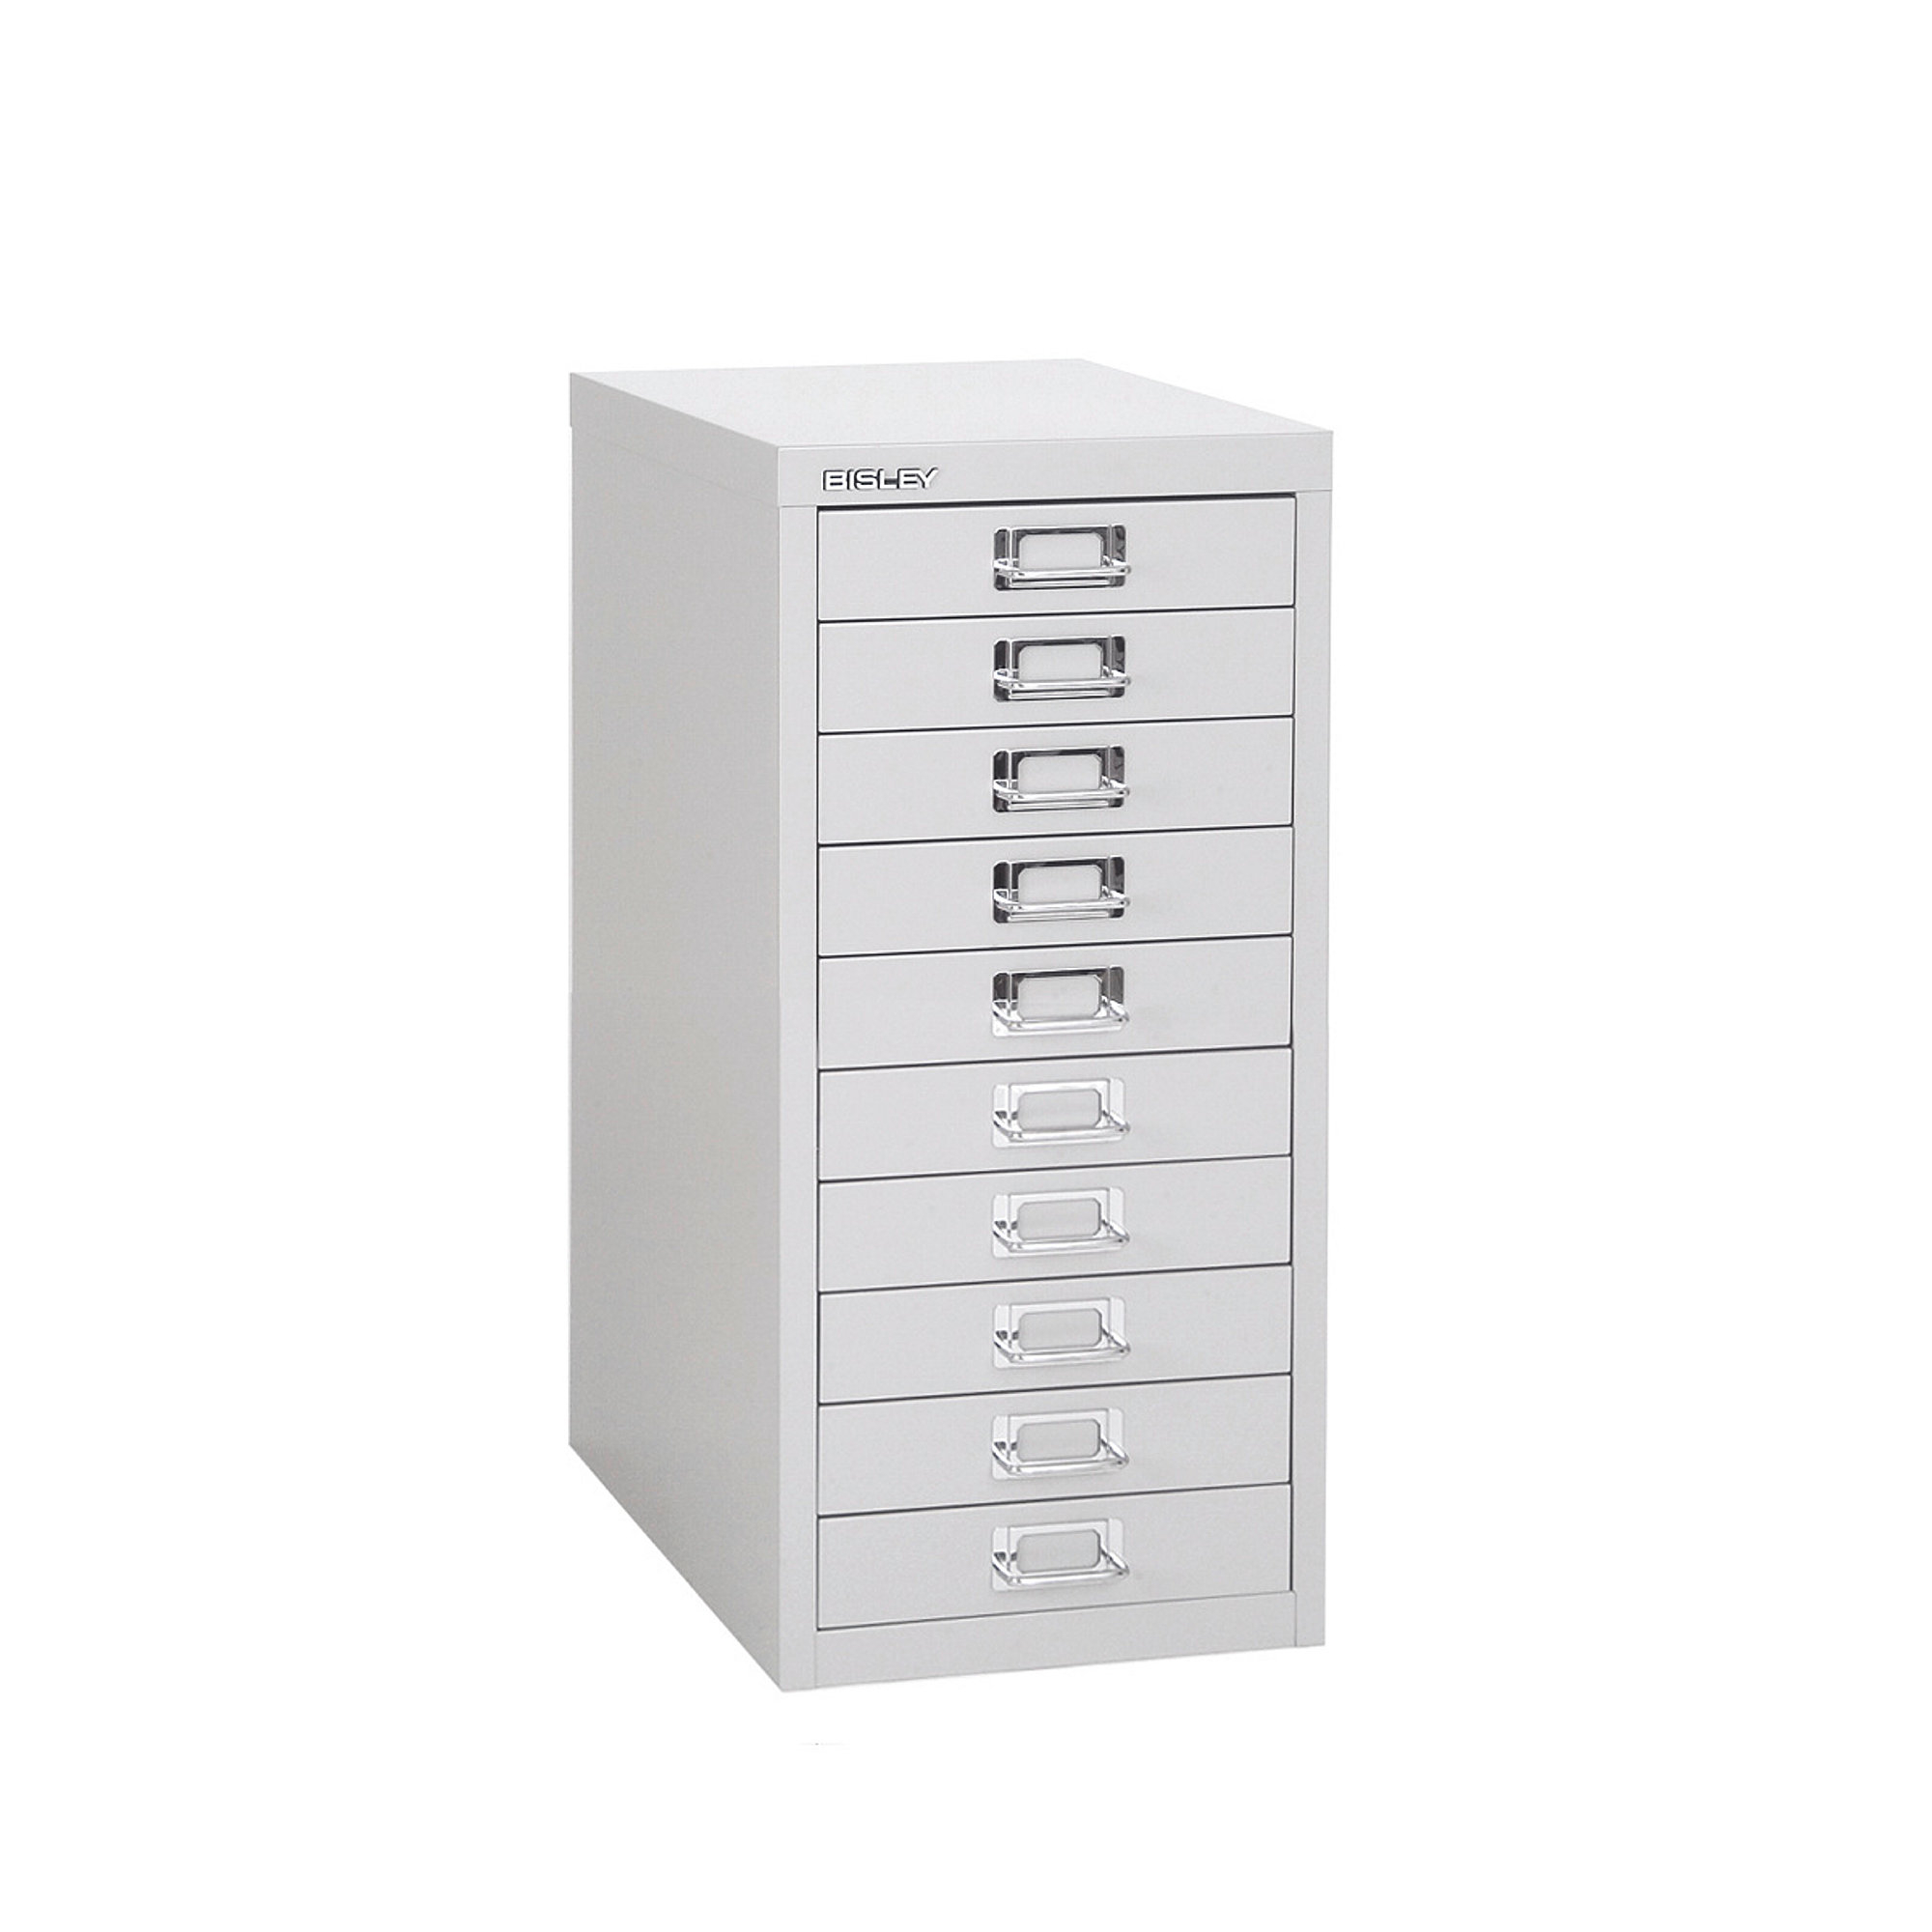 Bisley Soho Small Filing Cabinet 10 Drawer Silver Aj Products Ireland in measurements 2000 X 2000